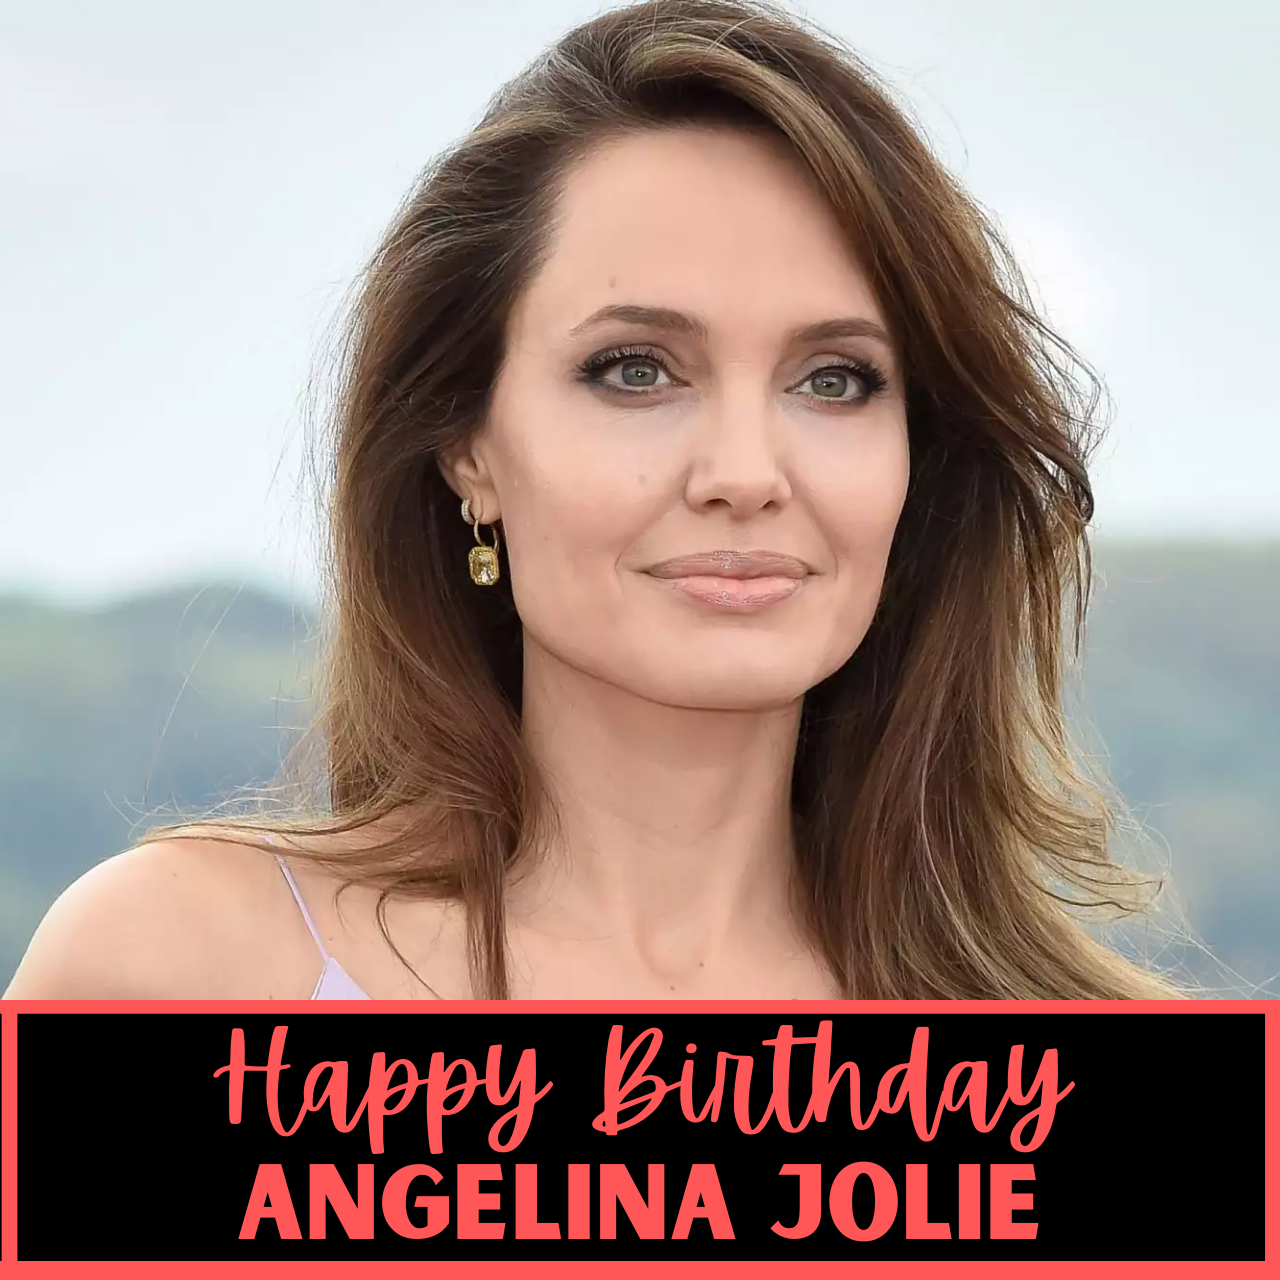 Happy Birthday Angelina Jolie: Wishes, Images, Quotes, Posters, Images, Greetings, and Messages to greet 'Angie'